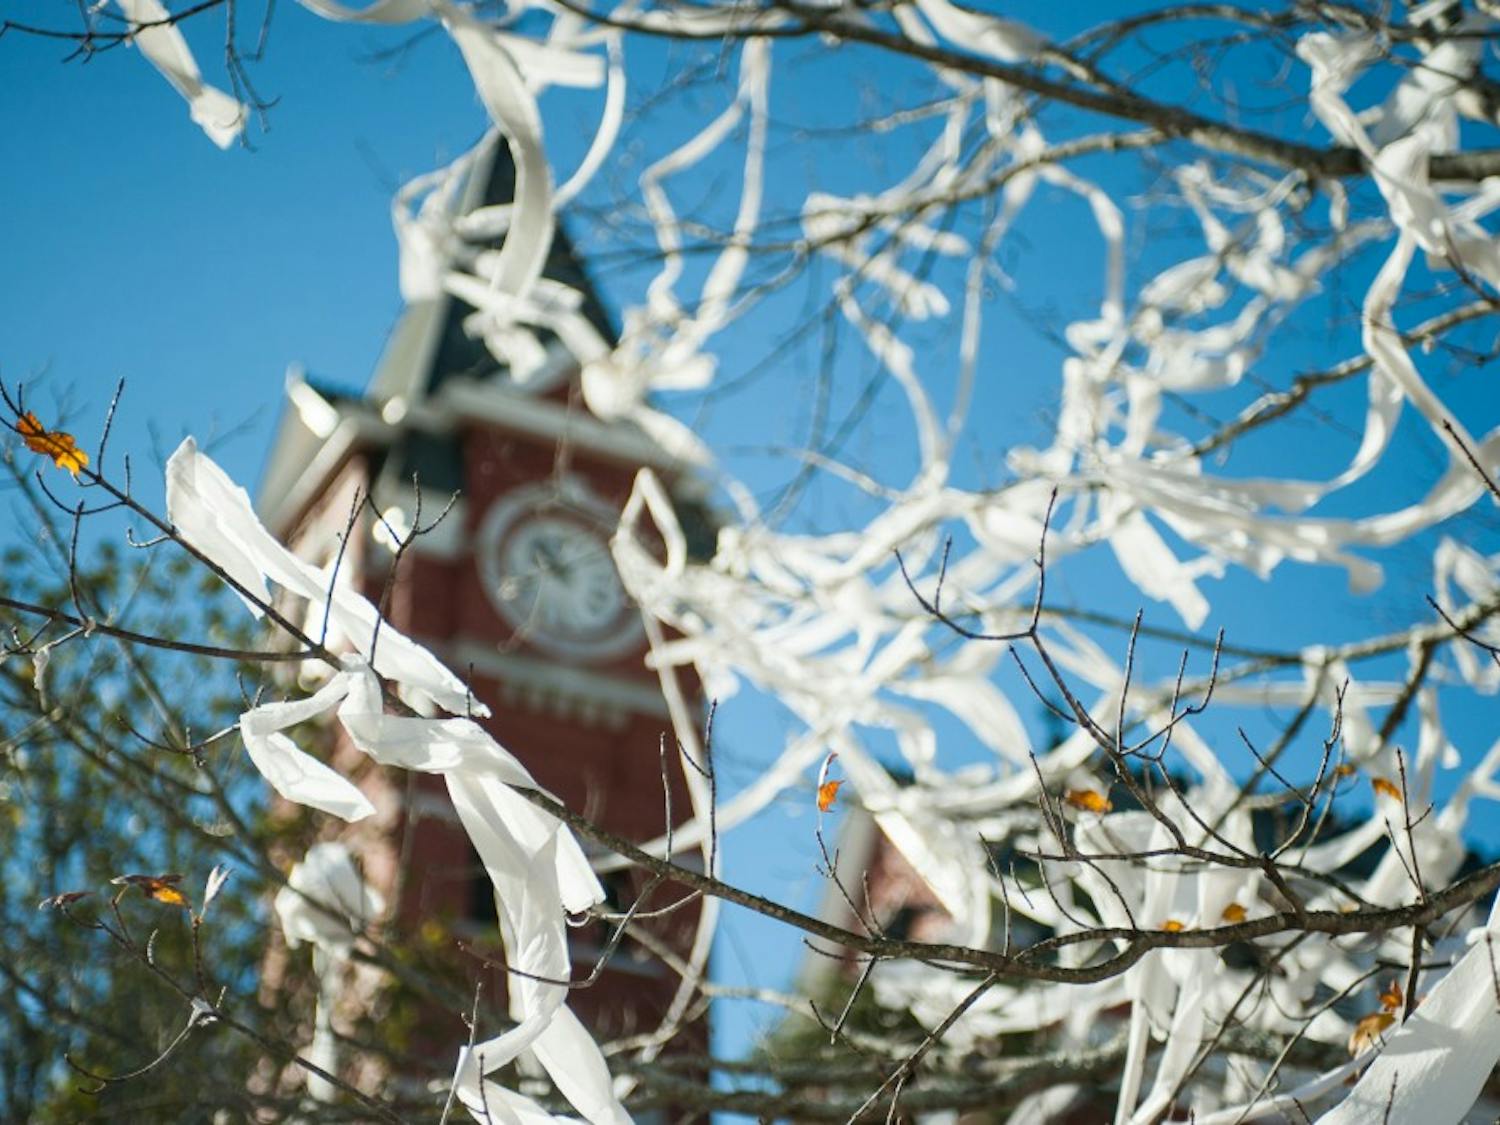 Toilet paper hangs from a tree in front of Samford Hall on Monday, Nov. 27 in Auburn, Ala.